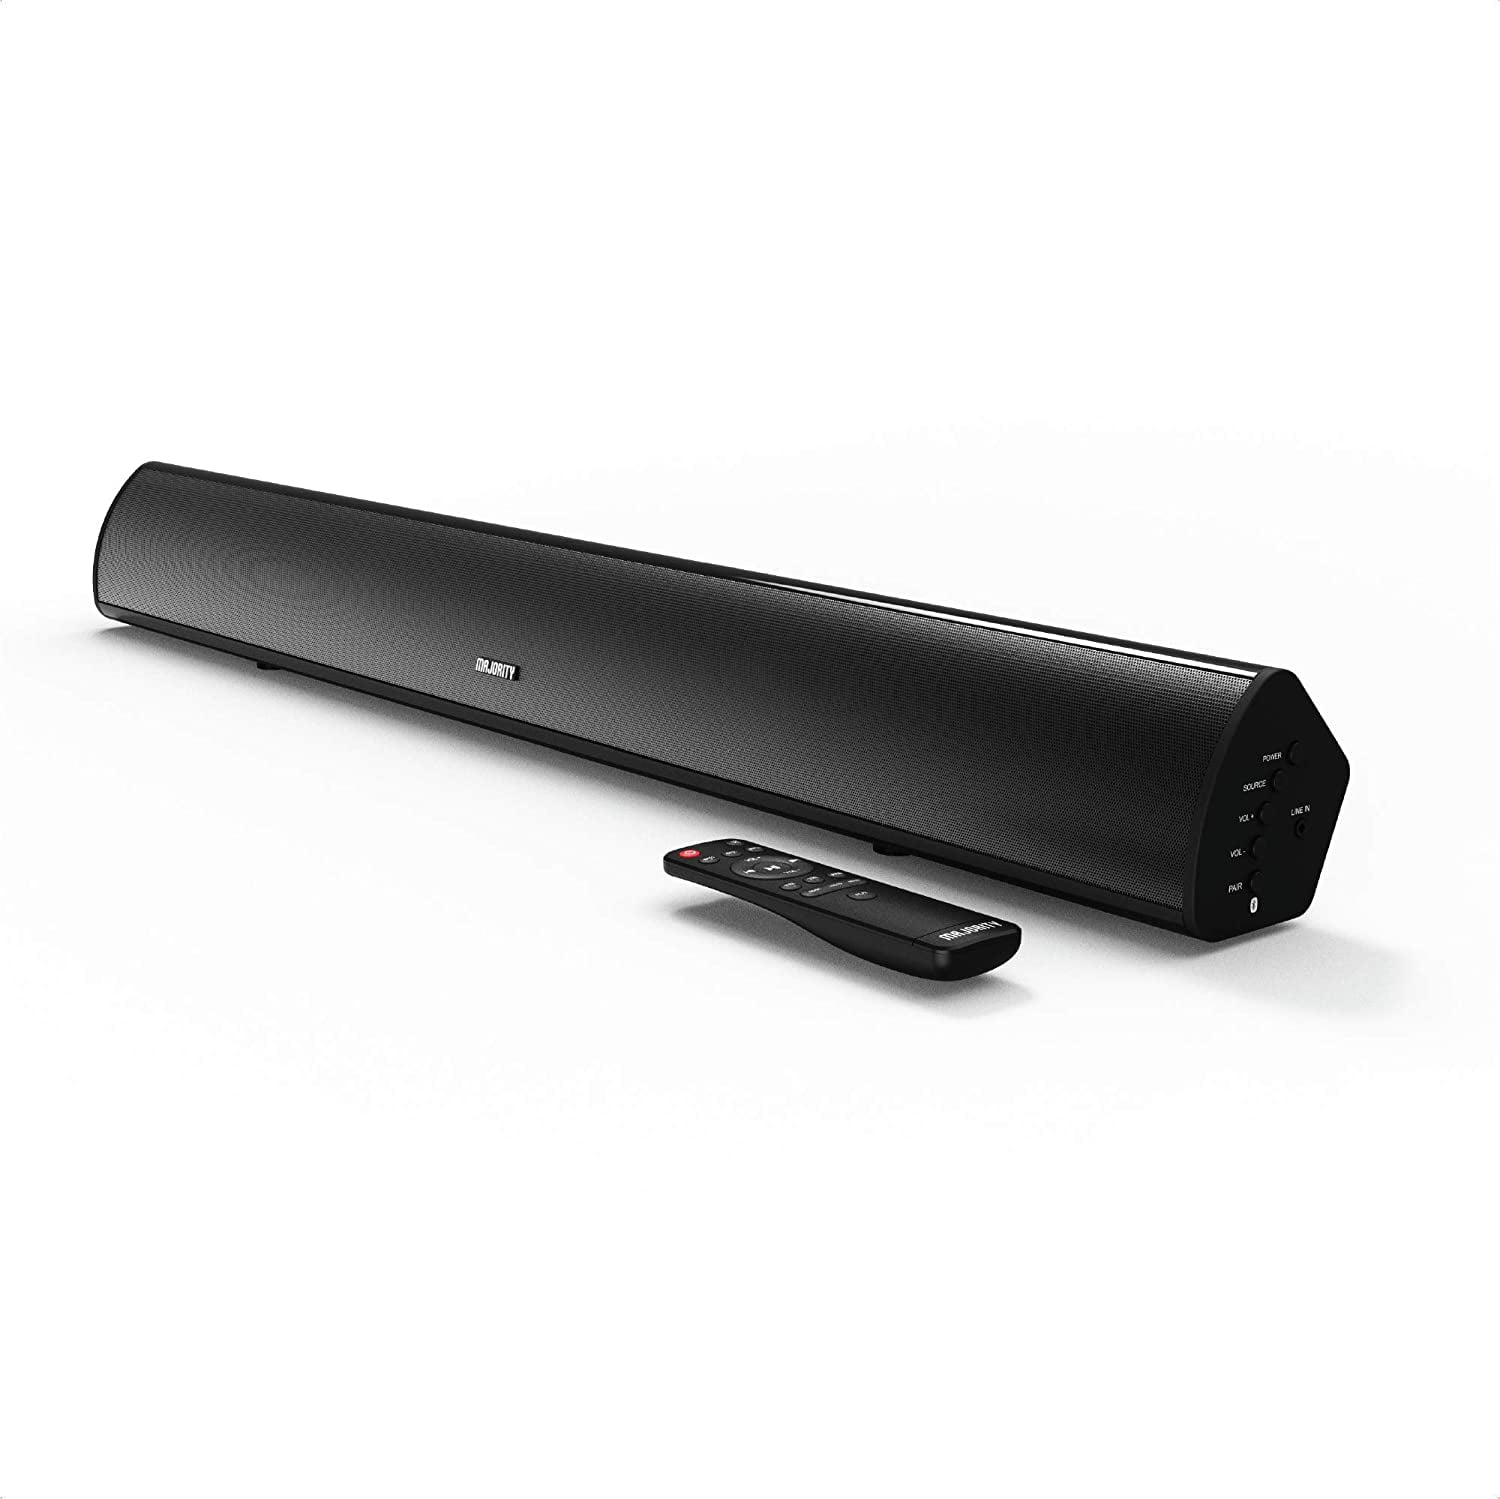 Majority Teton 32 2.1 Channel Bluetooth Sound Bar/TV Soundbar Speaker with Built-in Subwoofer and HDMI ARC, USB, RCA Optical Input (RCA, HDMI and Cables Included) Ideal for TVs/Gaming -